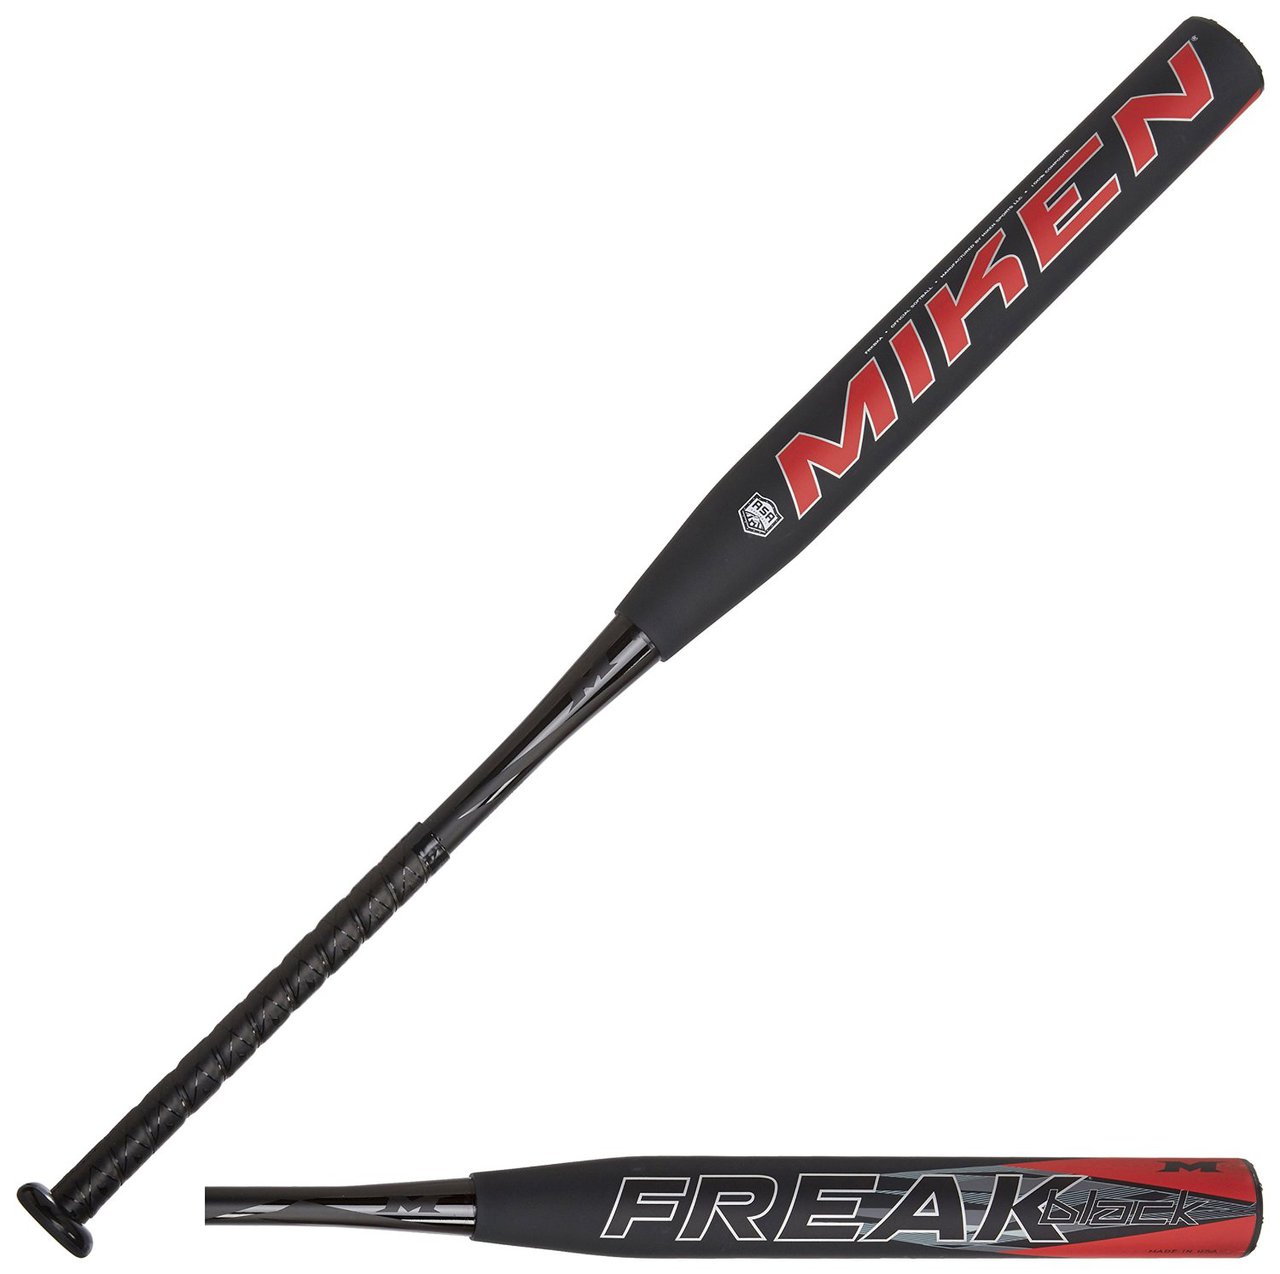 Triple Matrix Core technology increases our exclusive aerospace grade material volume by 5%, eliminating wall seams with a breakthrough carbonized process that maximizes both performance and durability. Flex 2 power (F2P) optimizes handle flex to barrel loading which maximizes the overall speed of the bat head through the hitting zone. 100 Comp is the revolutionary formula that changed the game and introduced certified Miken High performance equipment. It is engineered utilizing 100% Premium Aerospace Grade Fiber for legendary performance and durability. Made in USA. Triple Matrix Core technology increases our exclusive aerospace grade material volume by 5%, eliminating wall seams with a breakthrough carbonized process that maximizes both performance and durability. Flex 2 power (F2P) optimizes handle flex to barrel loading which maximizes the overall speed of the bat head through the hitting zone. 100 Comp is the revolutionary formula that changed the game and introduced certified Miken High performance equipment; It is engineered utilizing 100% Premium Aerospace Grade Fiber for legendary performance and durability.